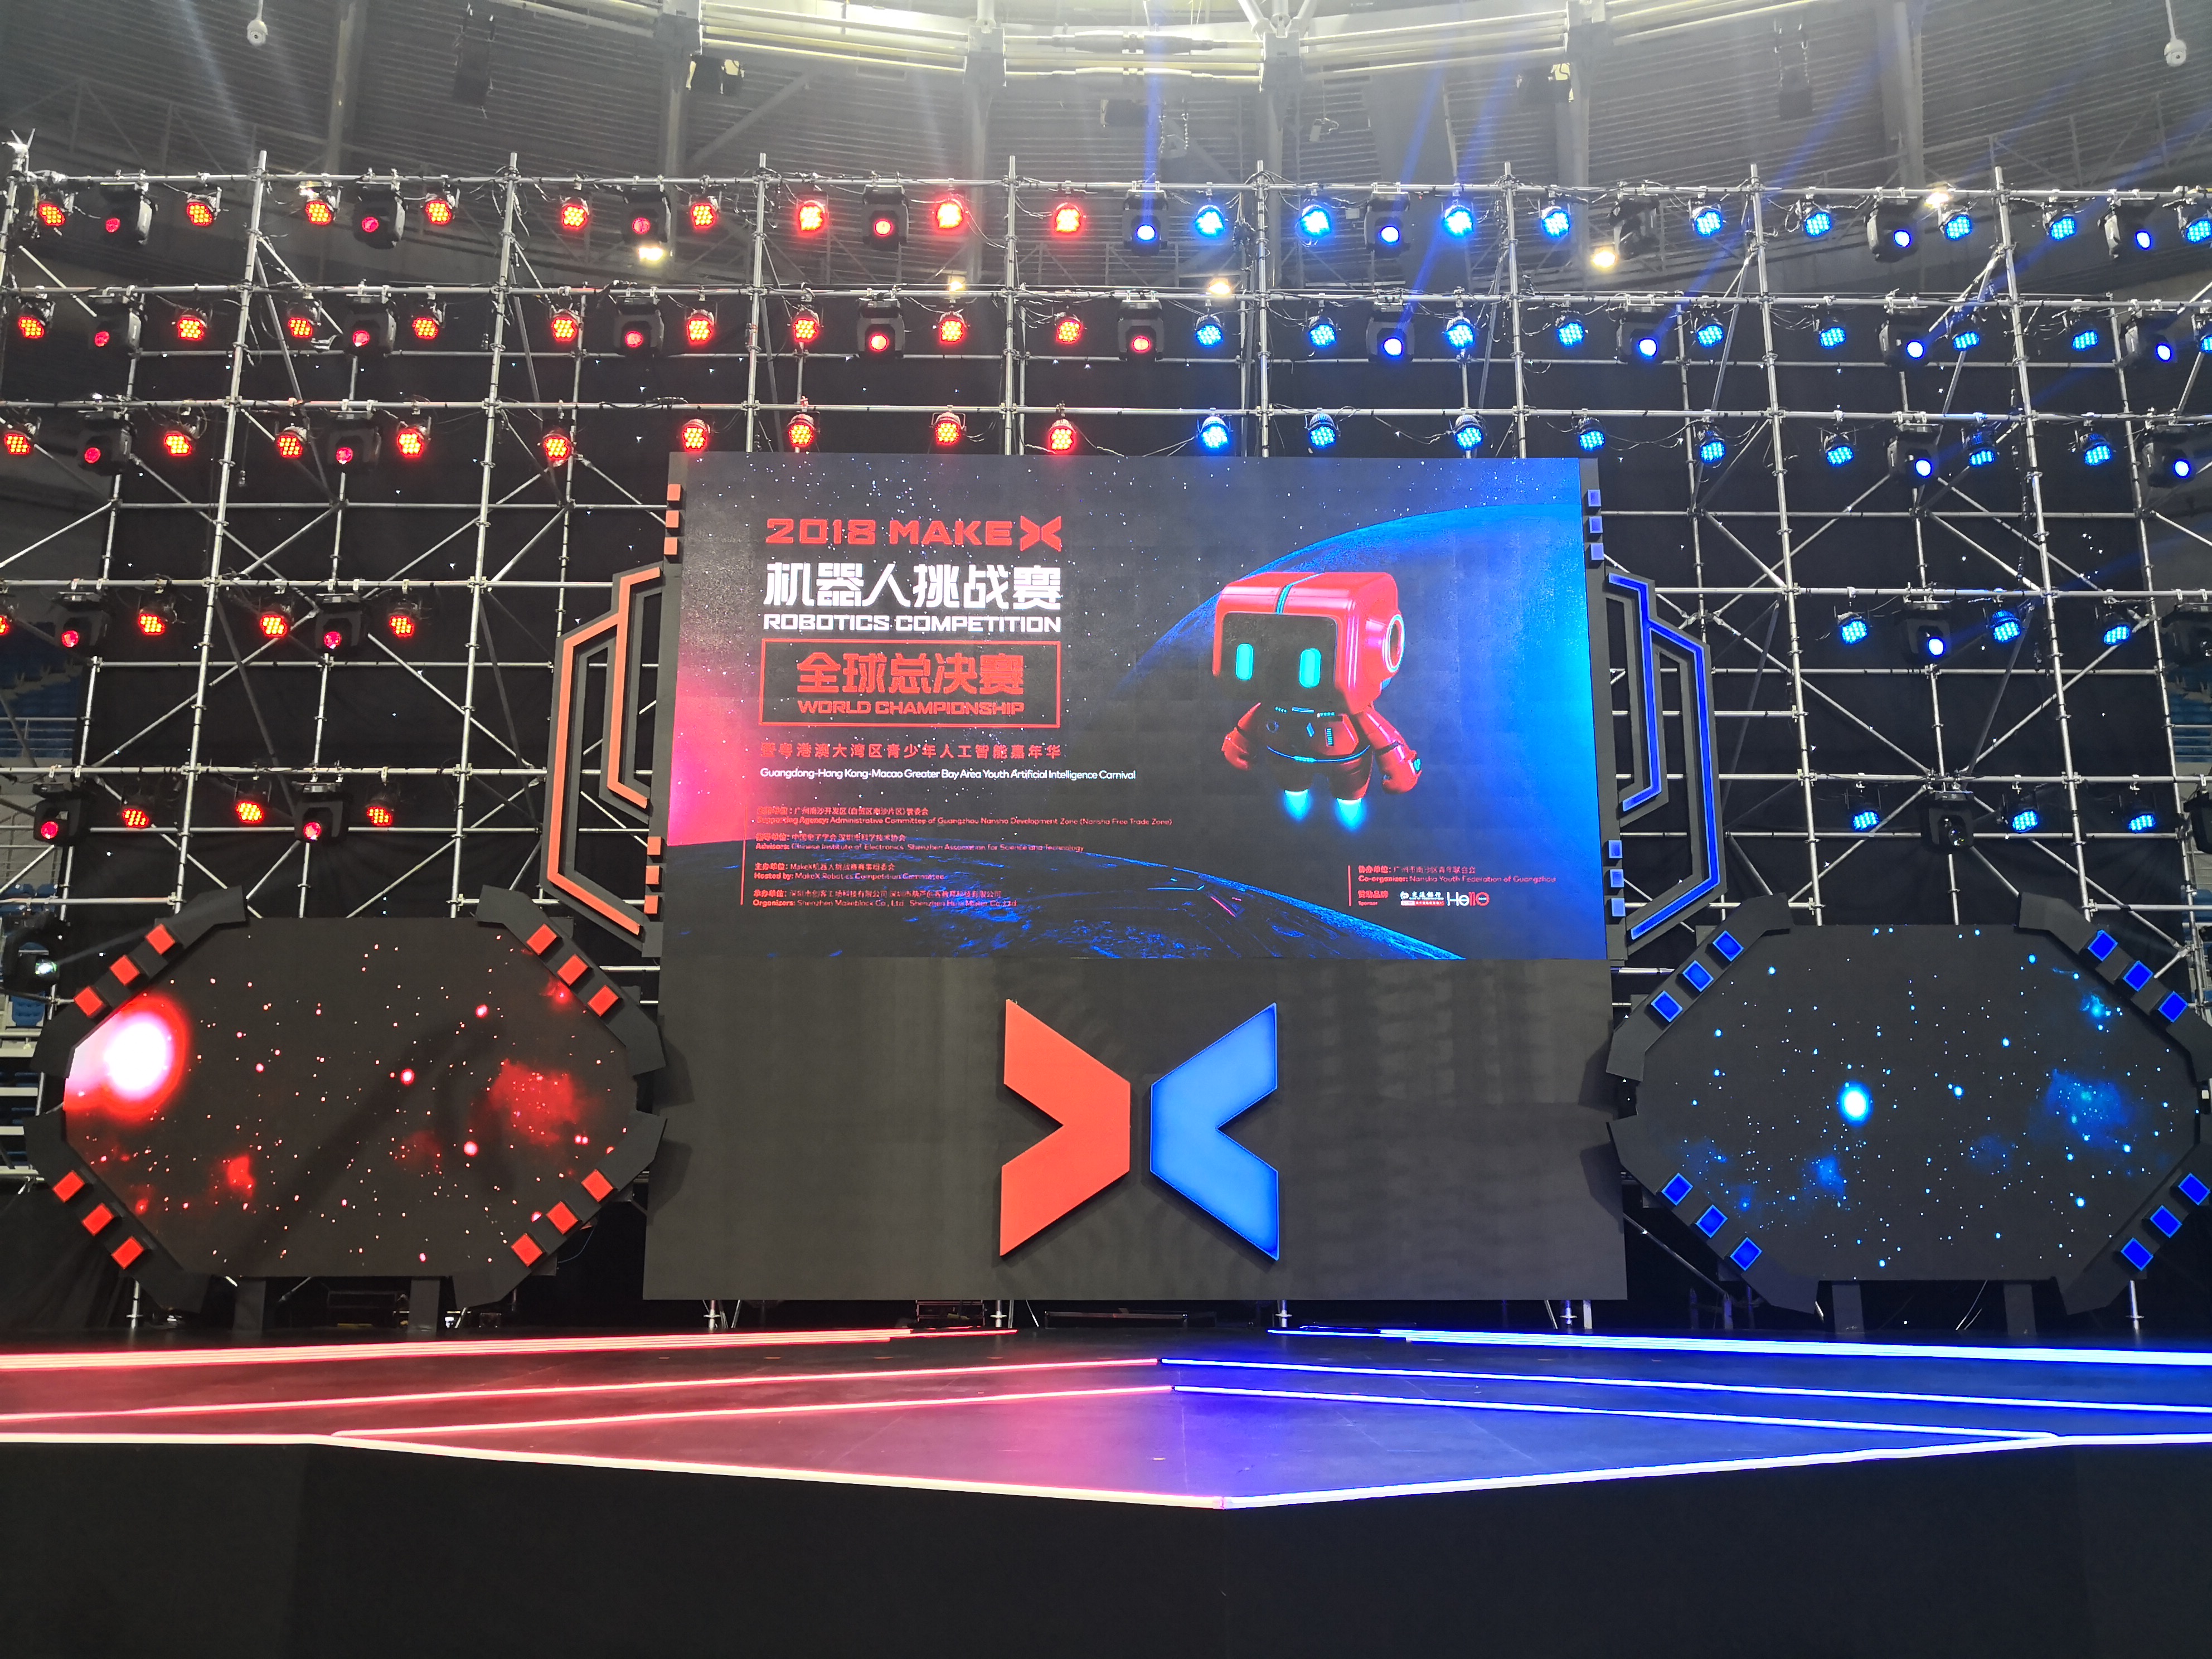 On December 7th, the 2018 World Championship of the MakeX Robotics Competition was held in Nansha. More than 1,000 students from over 30 countries and area across the world will gather together to pursue the top honor at the competition.